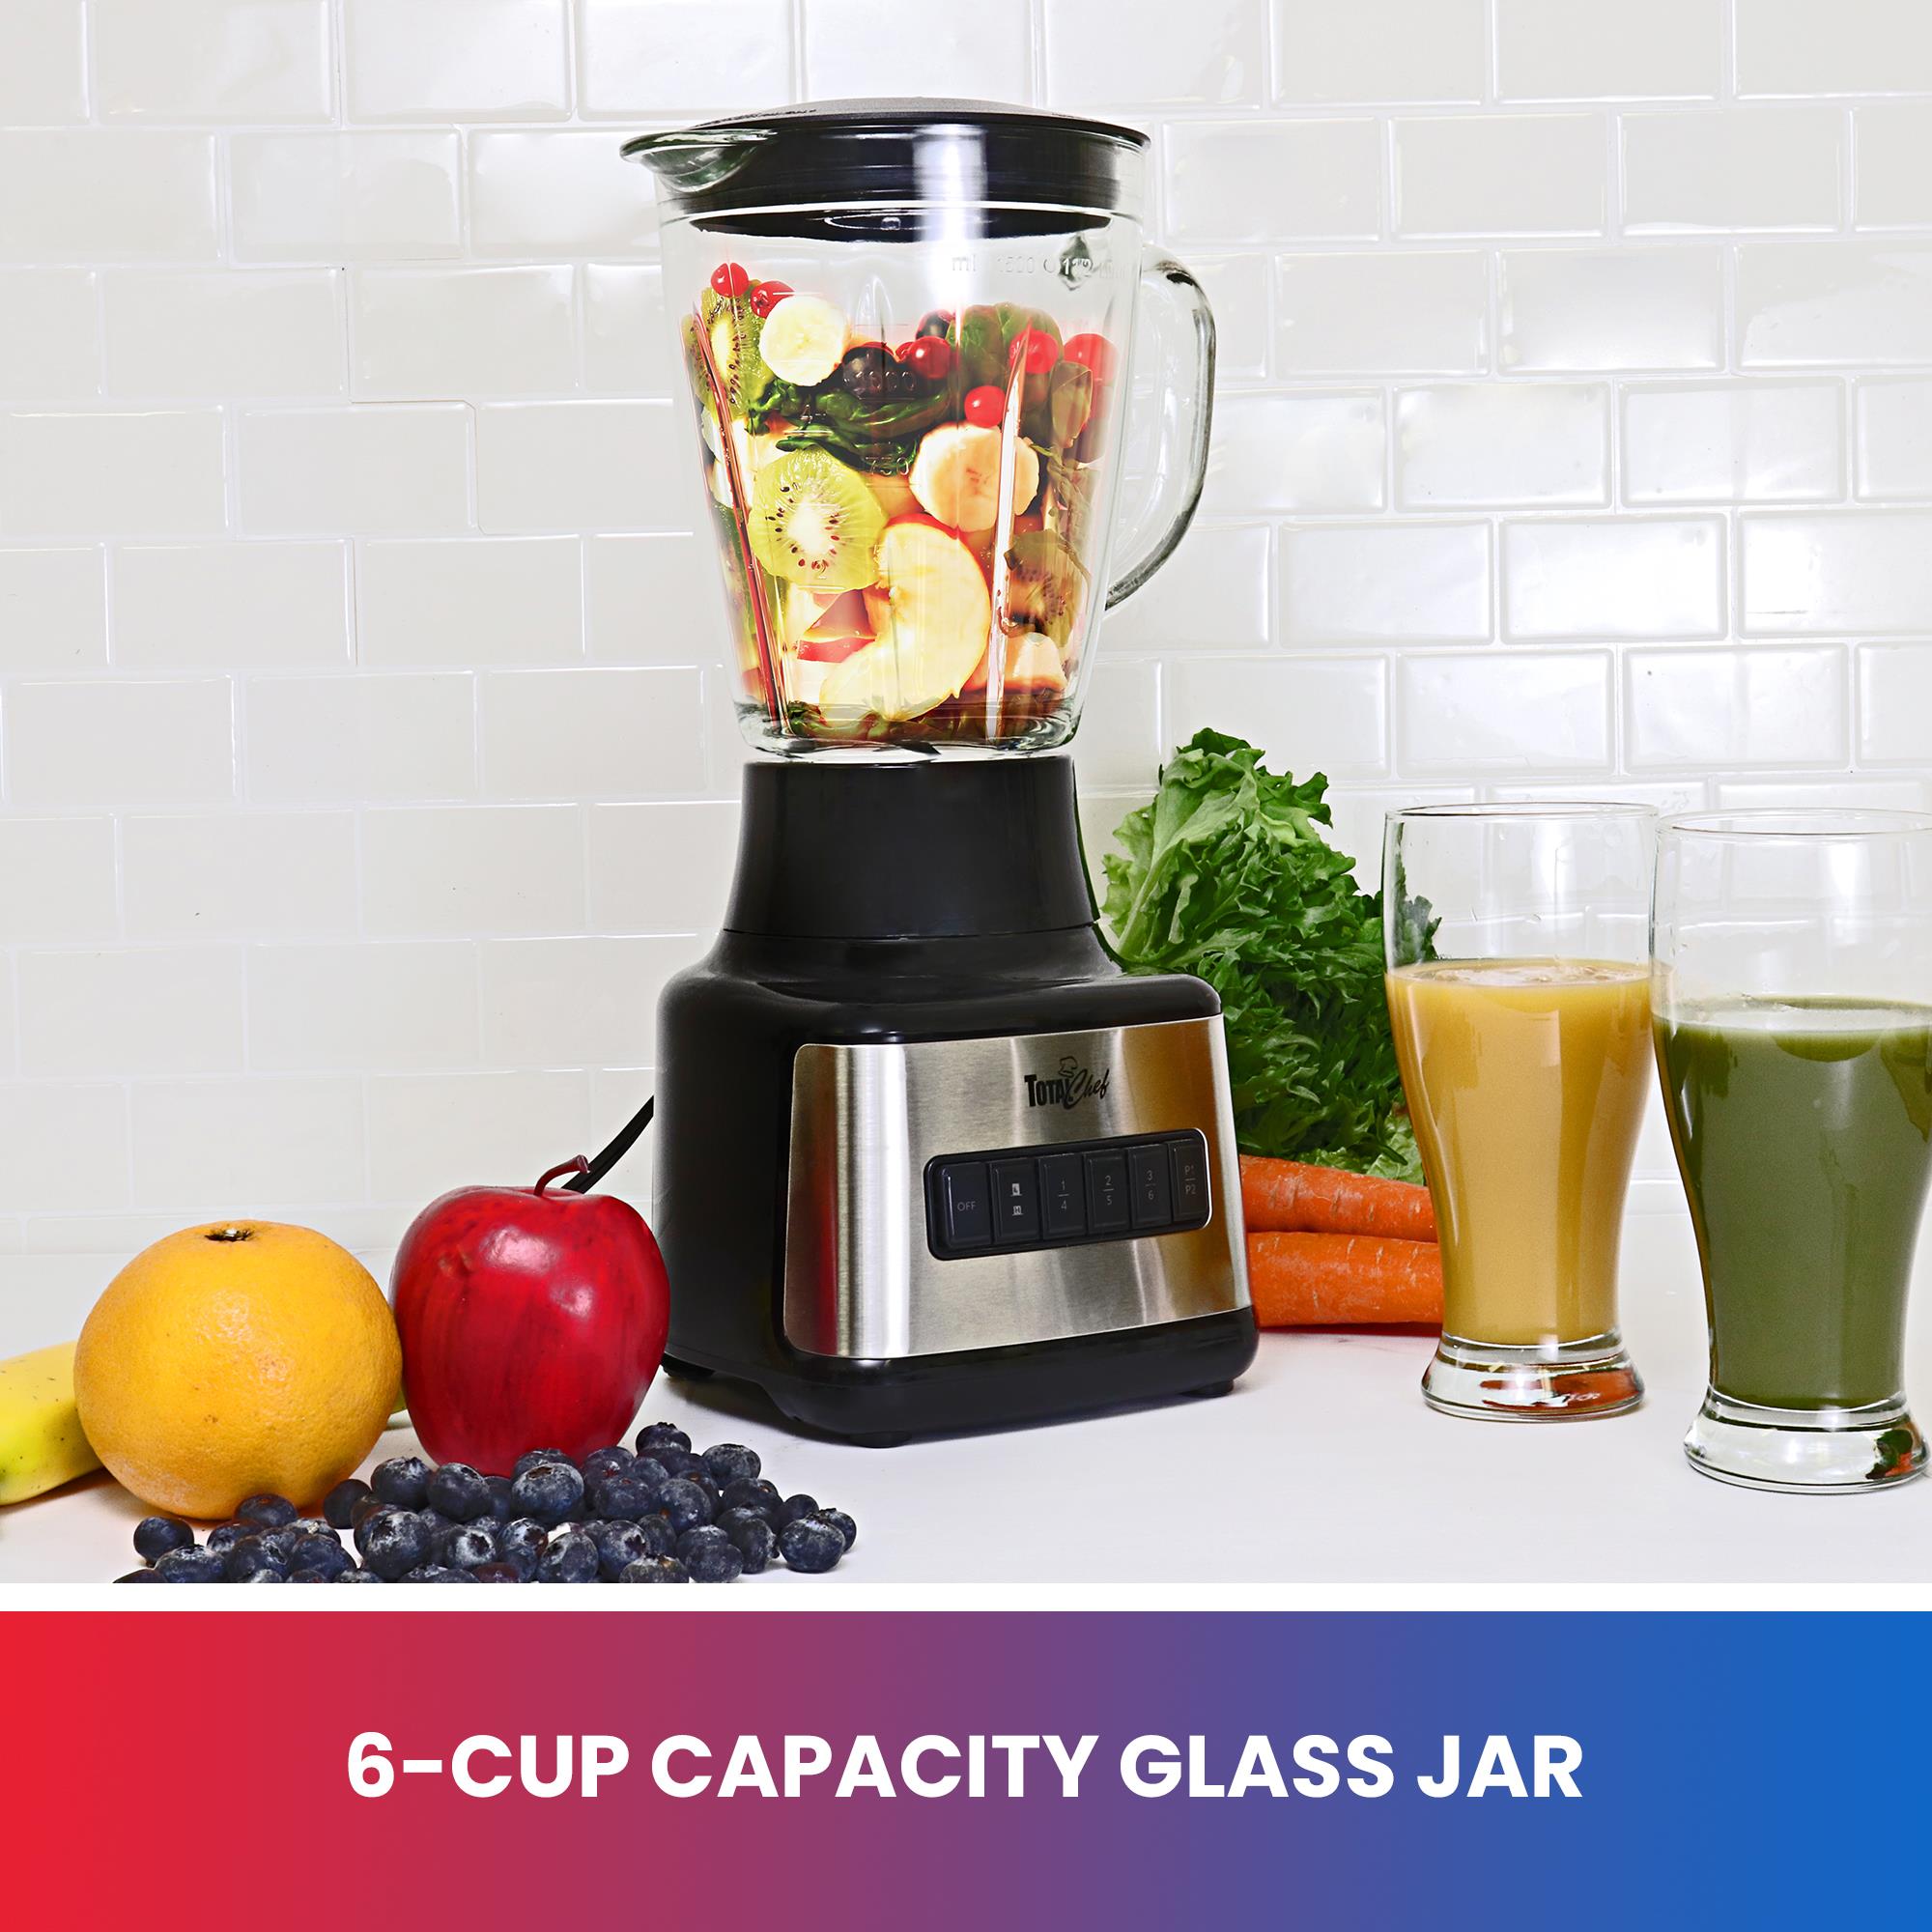 1000w Juicer With 5-speed Button, 2 Glass Cups - 2l Juicing Jug And 1 Small  Grinding Cup, Powerful Professional Kitchen Fruit And Smoothie Blender,  Easy To Clean - Multifunctional Fully Automatic!